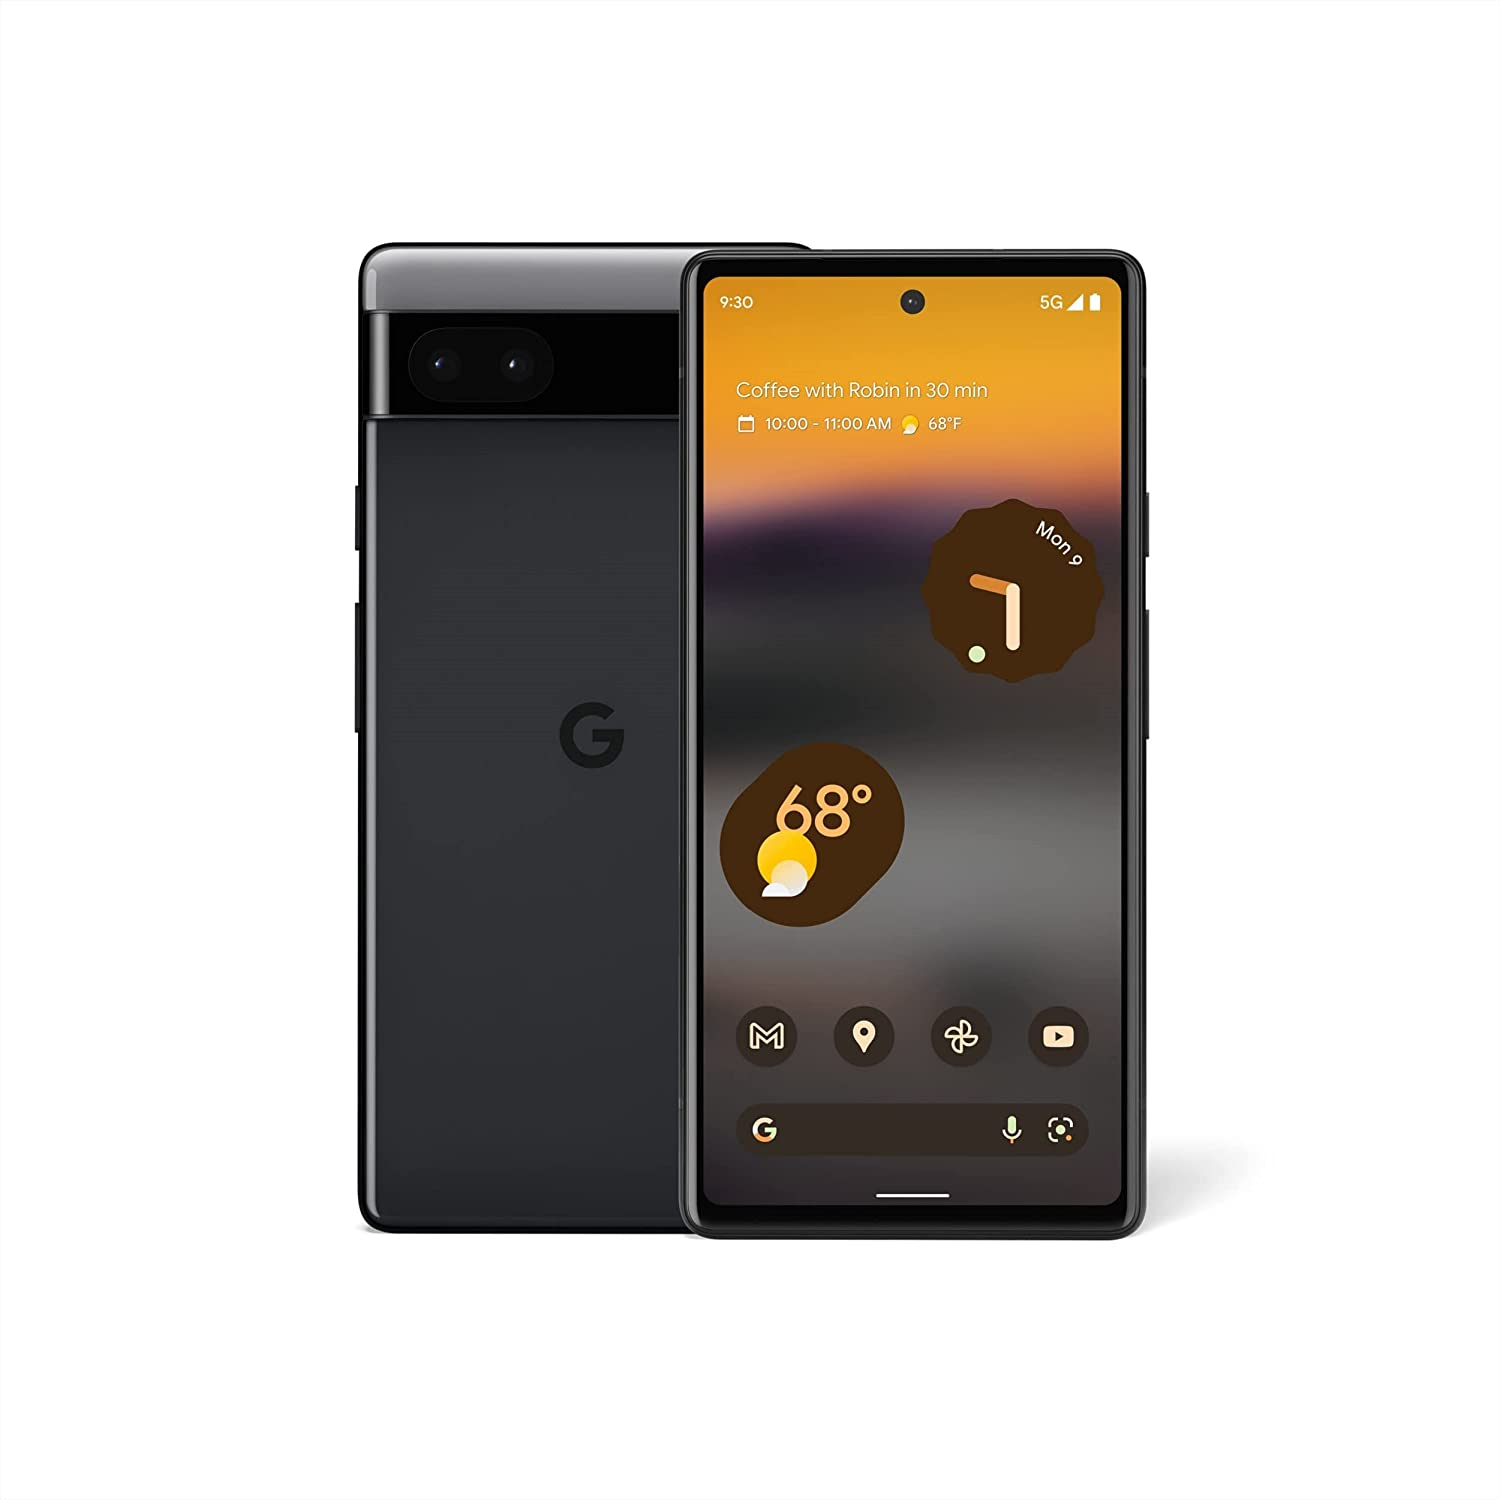 Google Pixel 6a - 5G Android Phone - Unlocked Smartphone with 12 Megapixel Camera and 24-Hour Battery $399